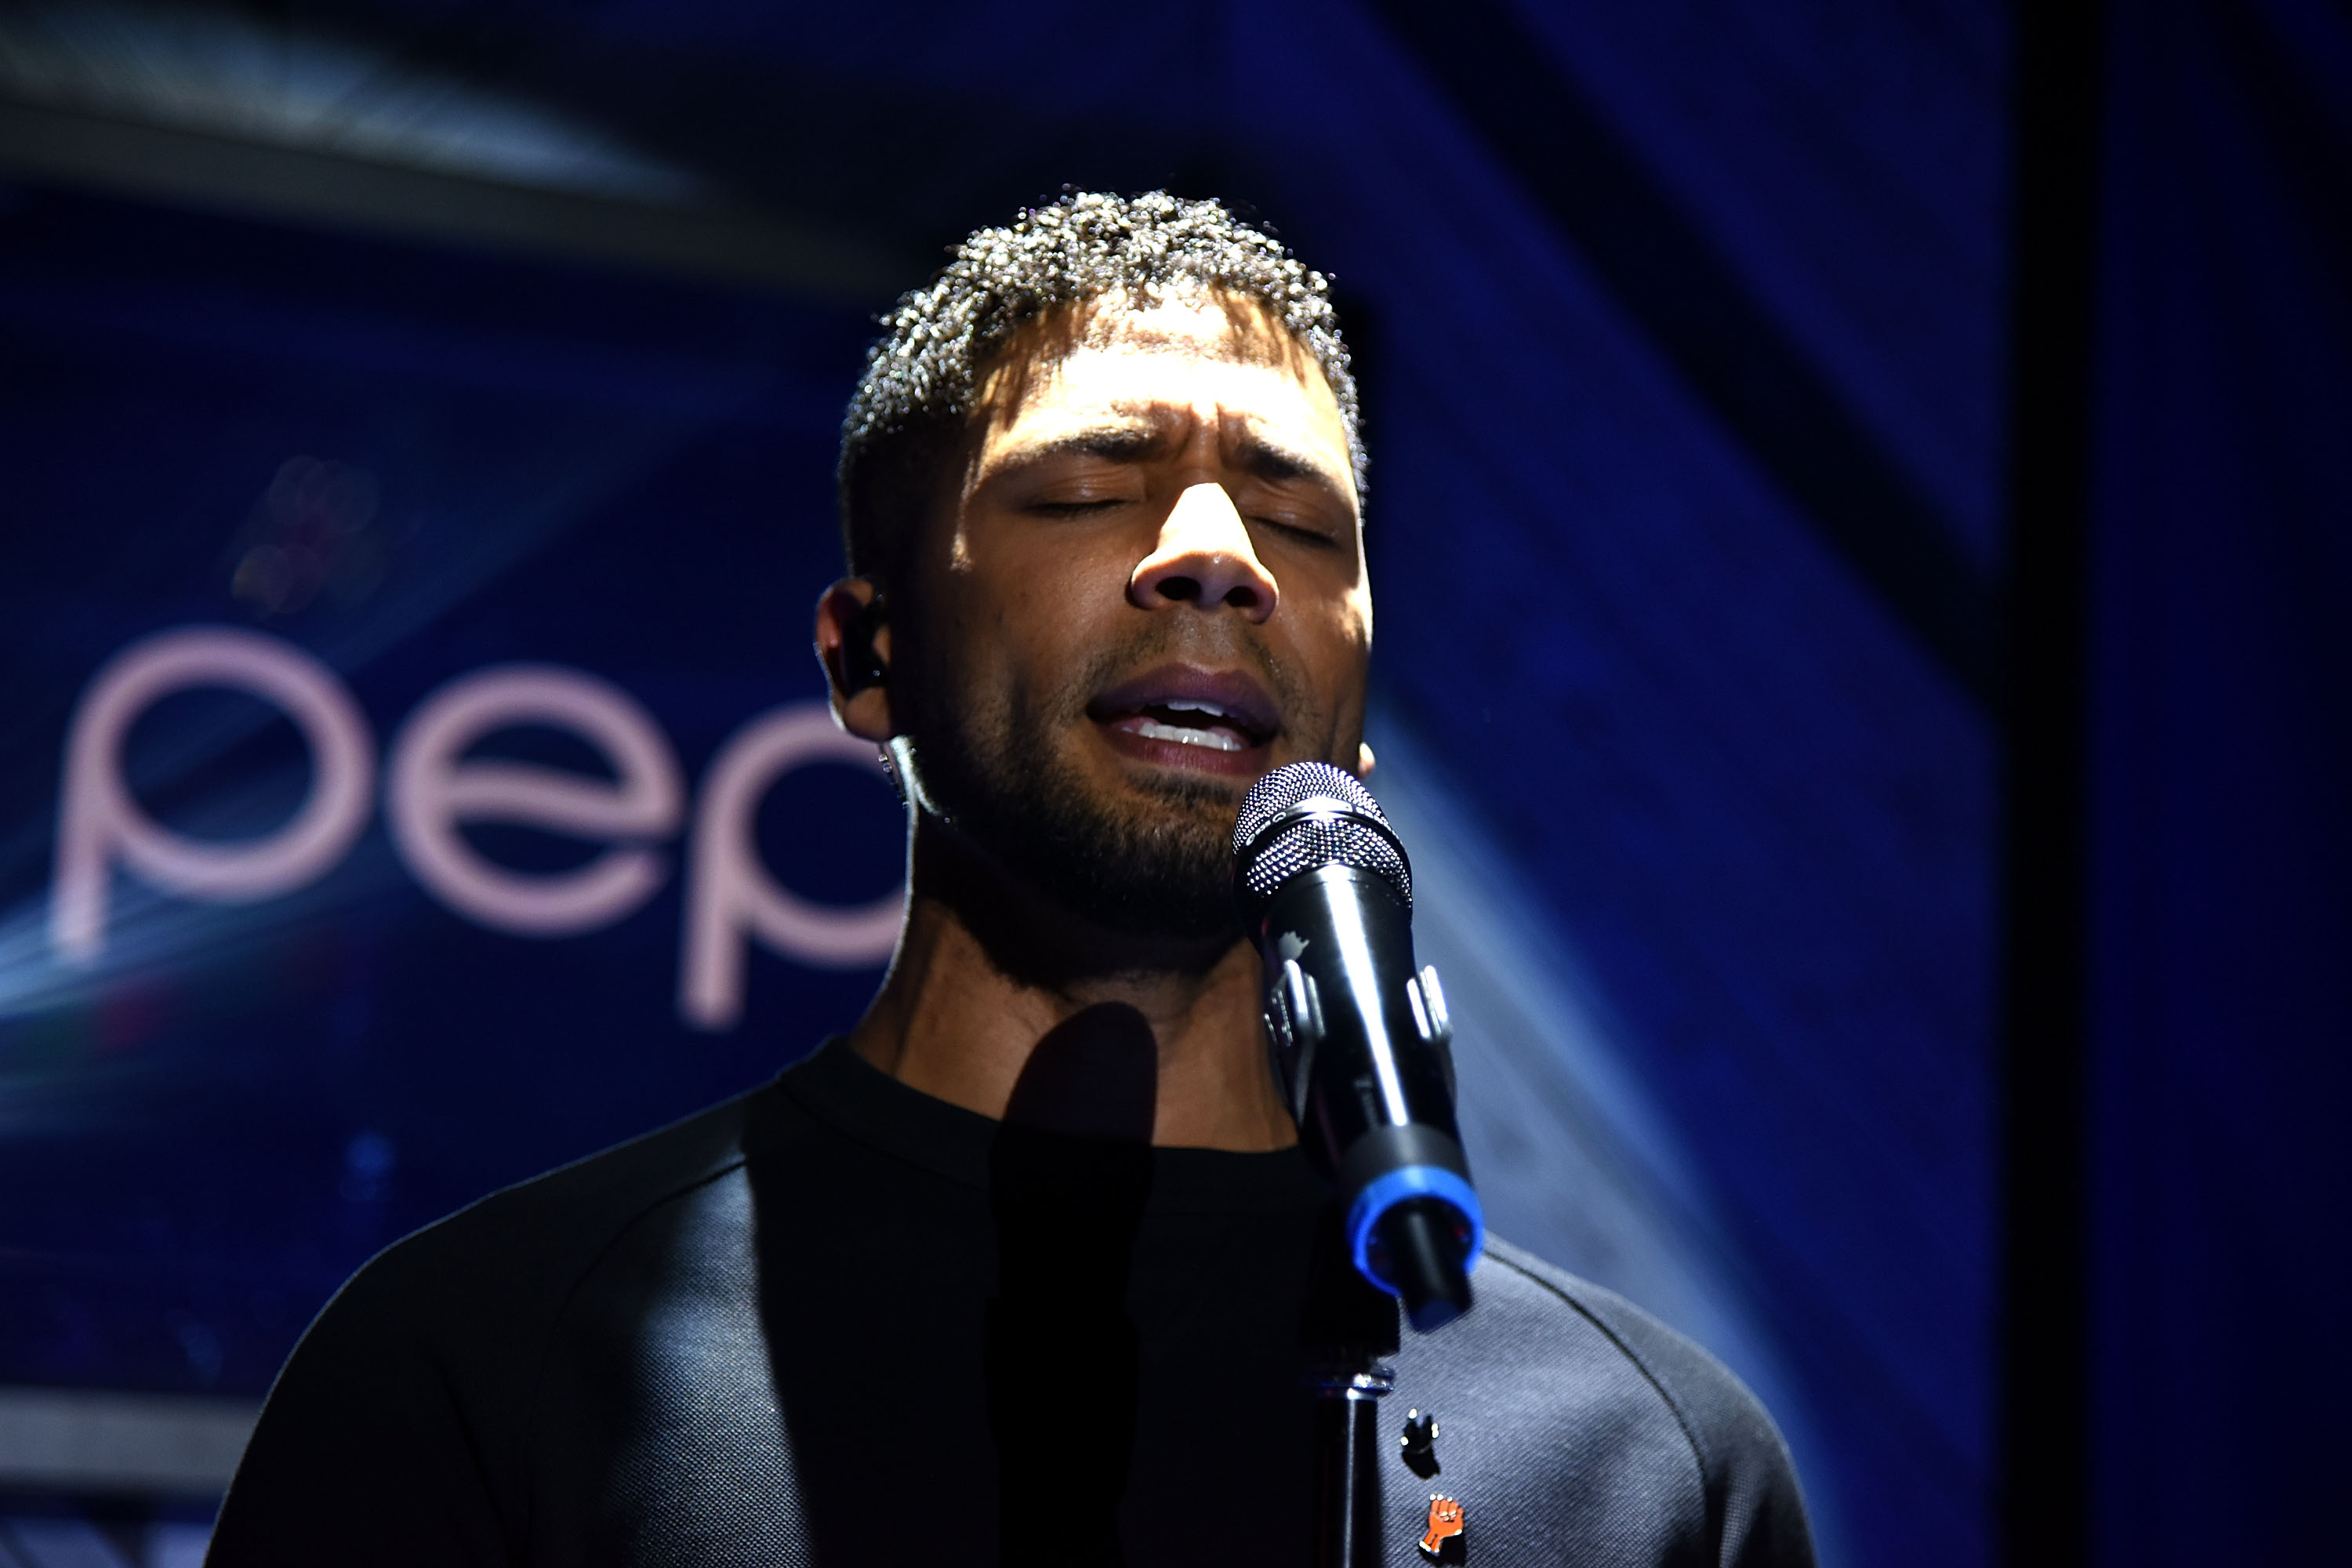 Pepsi Empire Viewing Party With #NextPepsiArtist Jussie Smollett At Gansevoort Park Avenue NYC